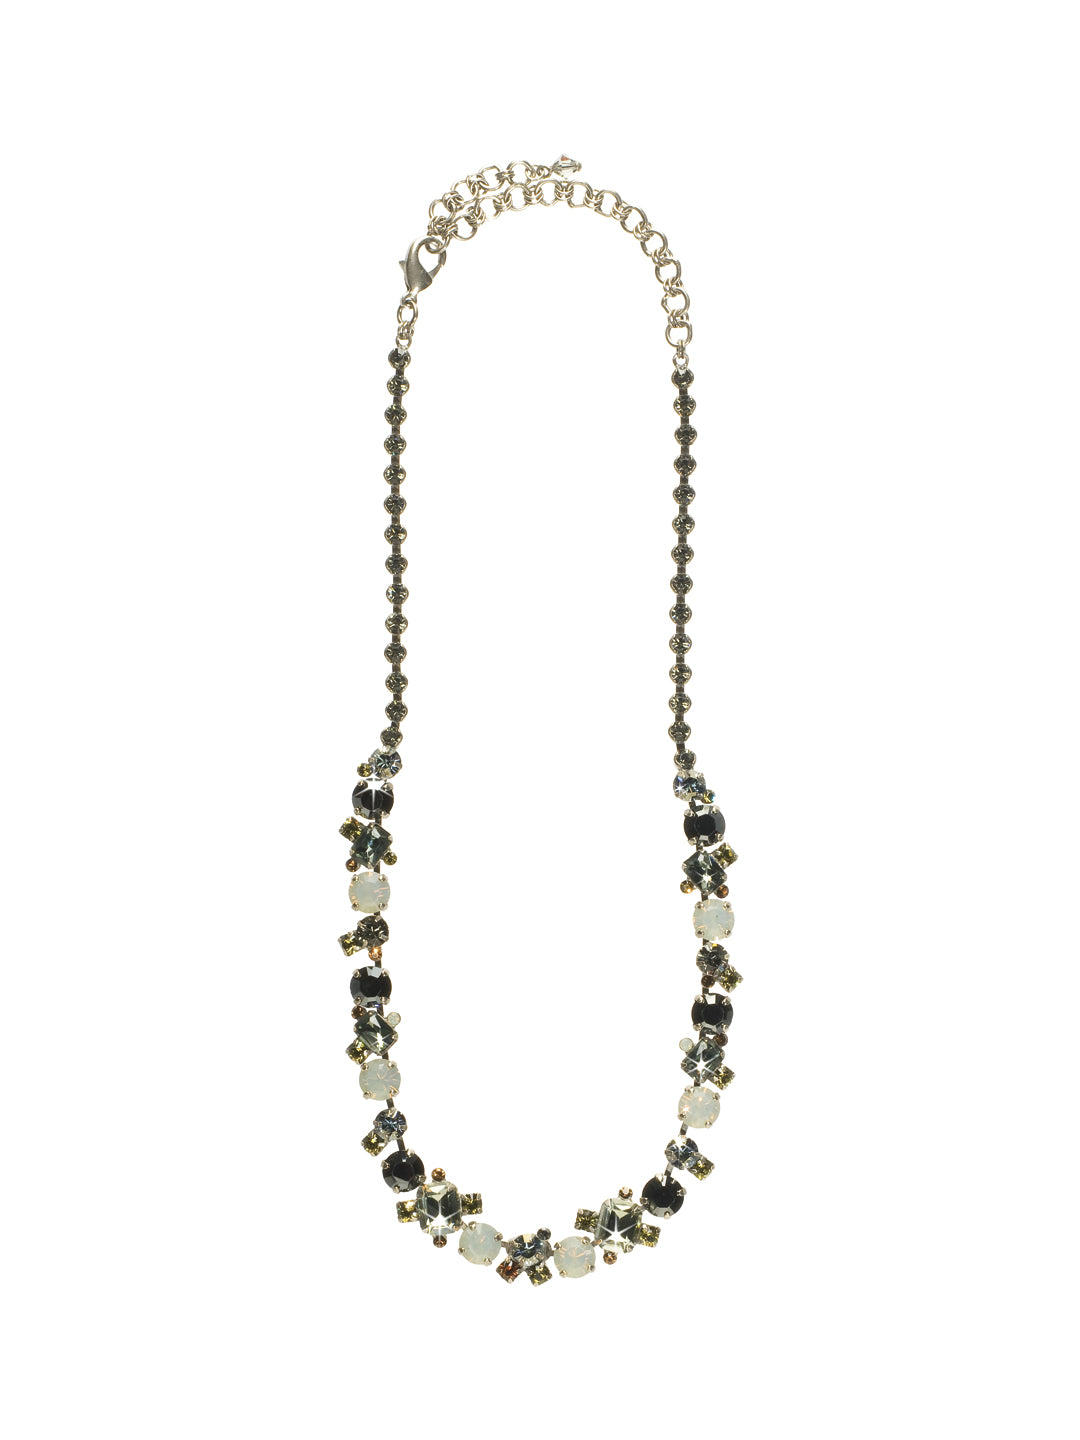 Sofia Tennis Necklace - NCF6ASCJ - A classic way to shine! This shimmering classic necklace features stations of crystal clusters alternating between round crystal accents to form an interwoven pattern. Rhinestone chain completes this design for all around sparkle! From Sorrelli's Concrete Jungle collection in our Antique Silver-tone finish.